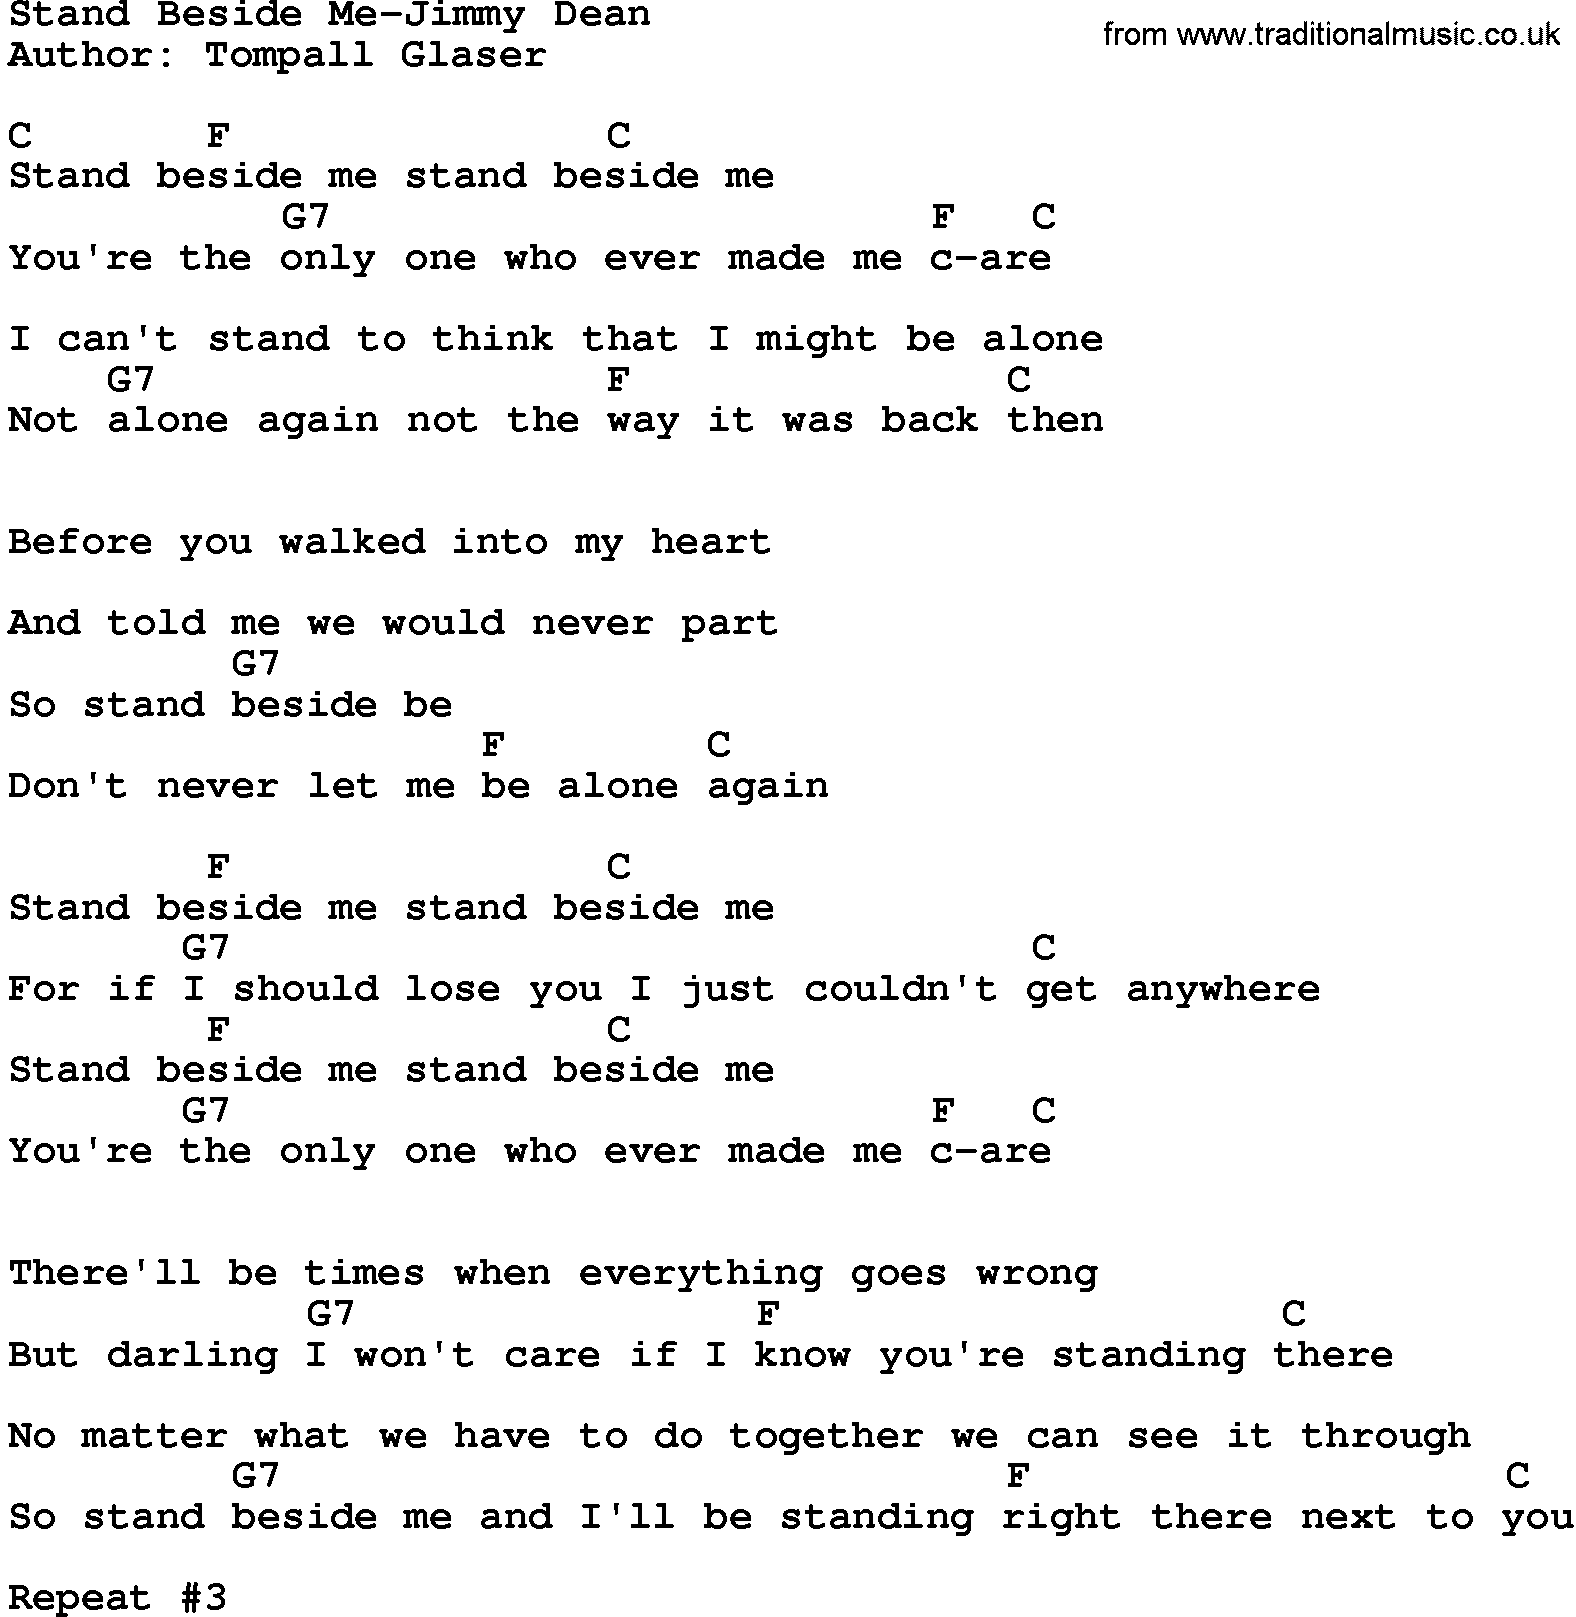 Country music song: Stand Beside Me-Jimmy Dean lyrics and chords